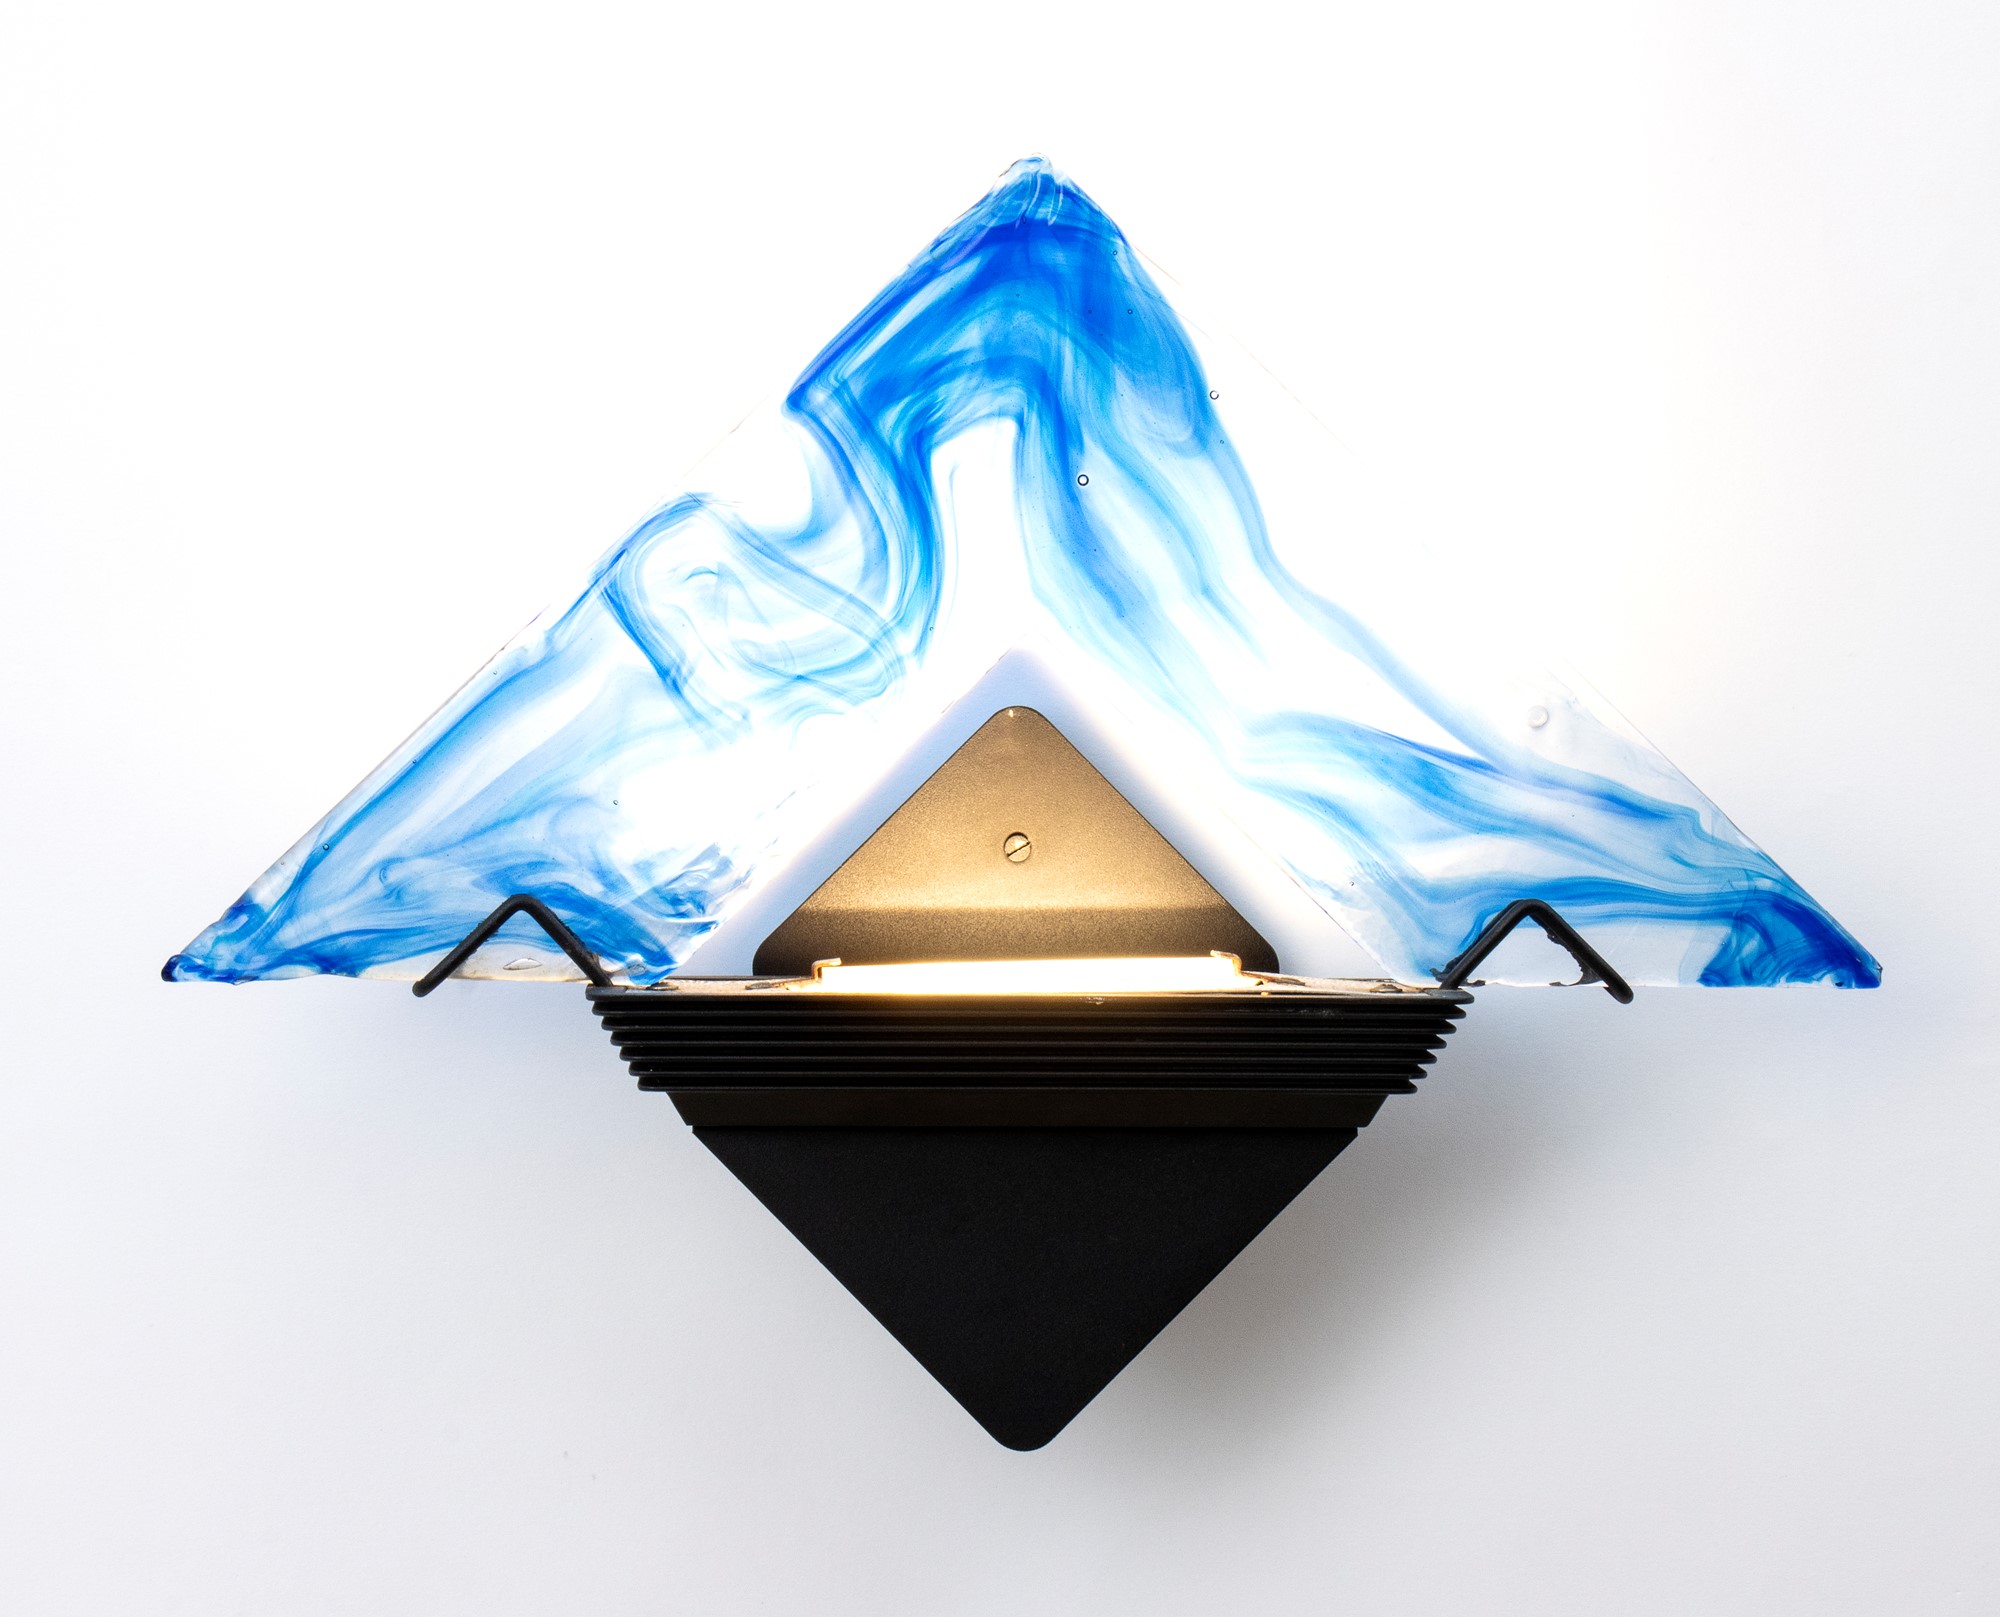 La Murrina wing lamp in hand blown Murano glass mounted on a triangular frame - Image 5 of 27